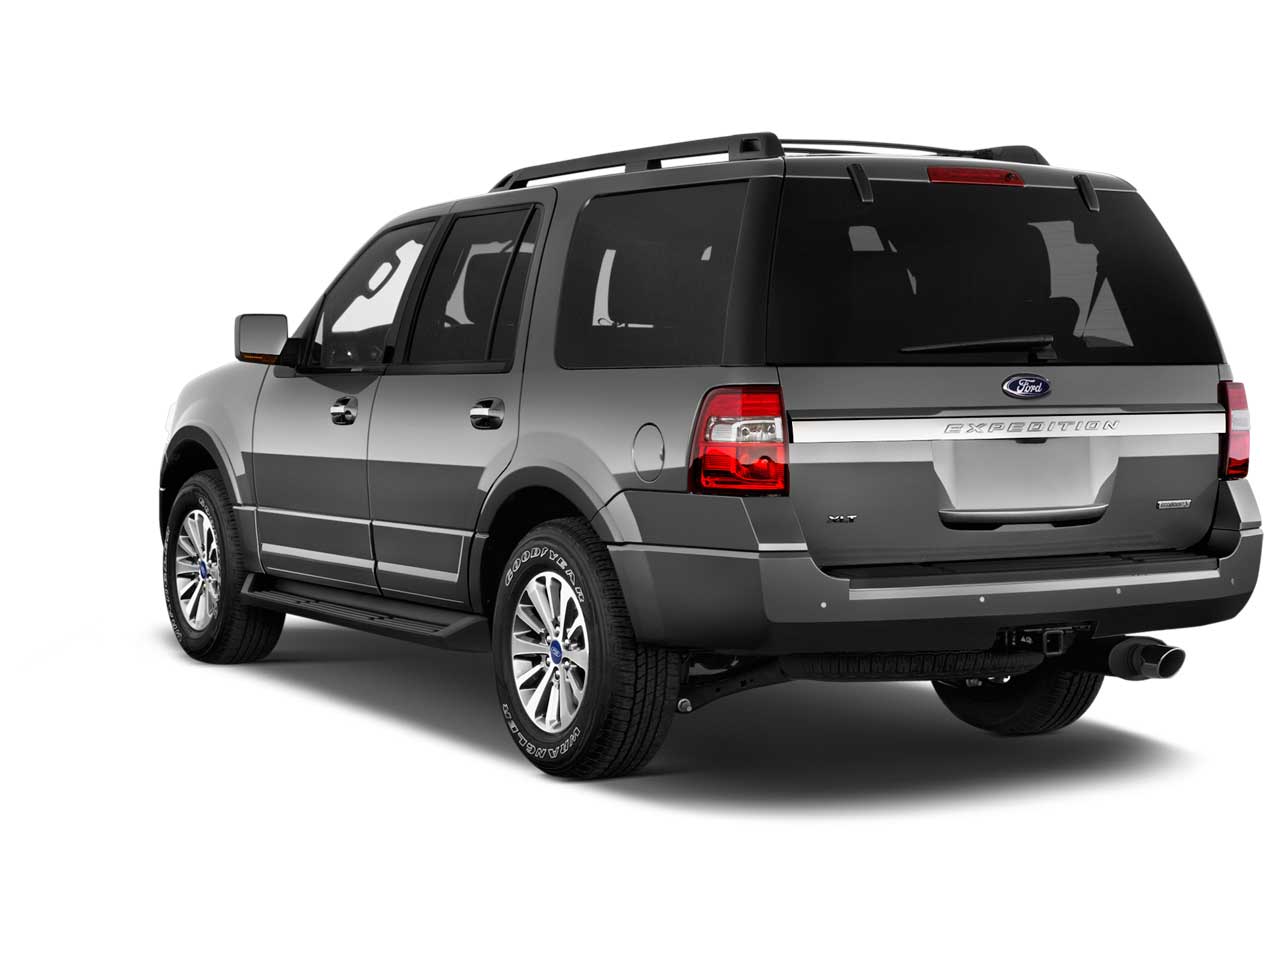 Ford Expedition XLT Exterior rear cross view